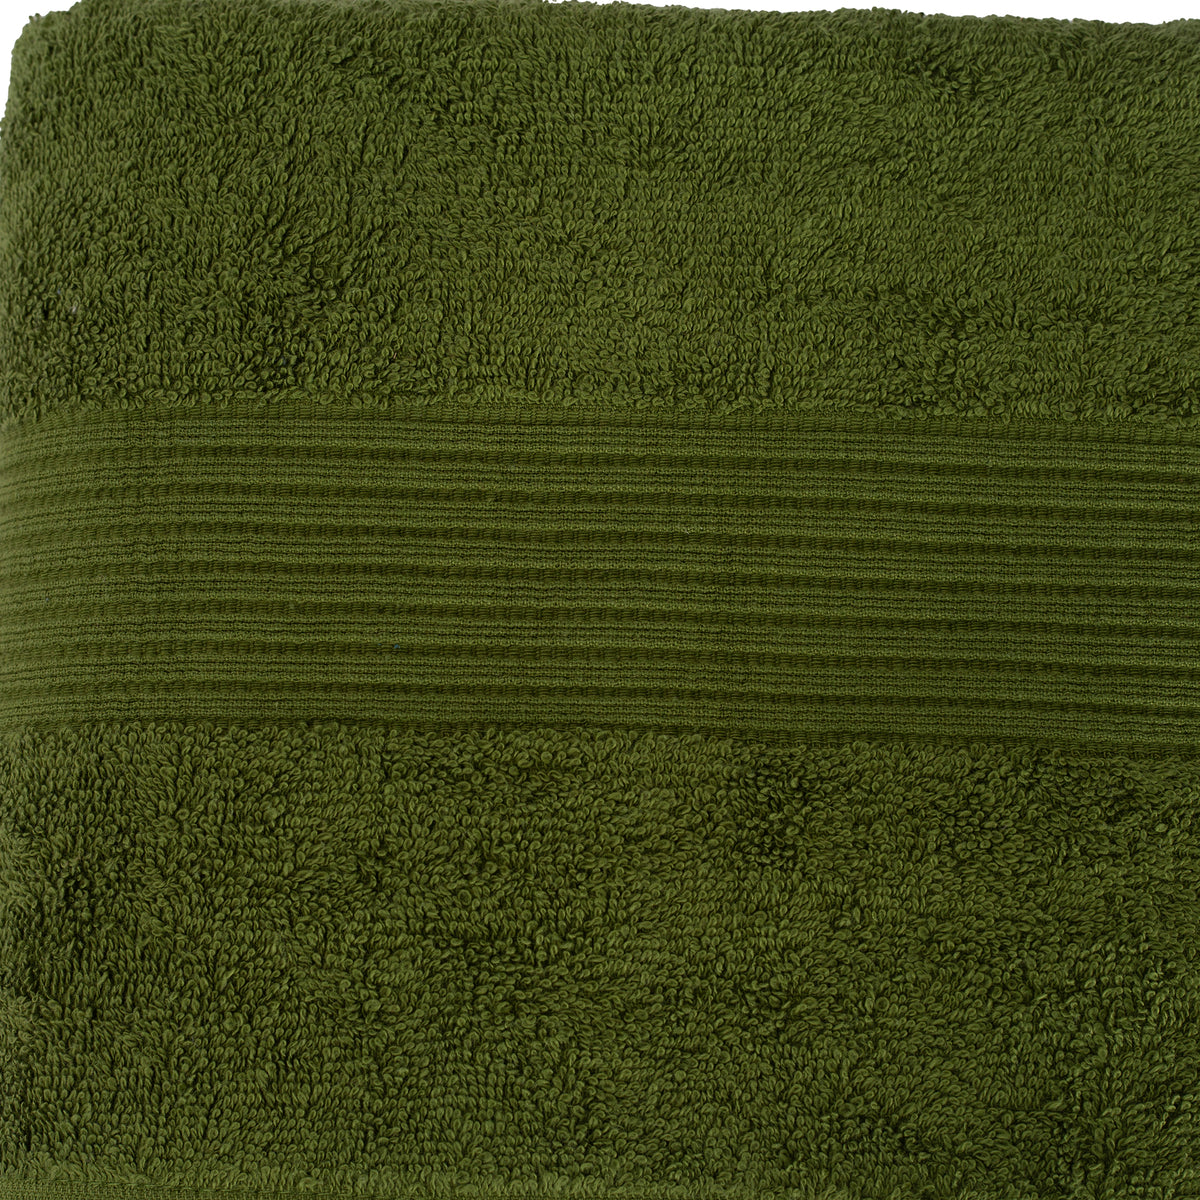 Jeneth Ultra-soft and highly absorbant Calliste Green Towel